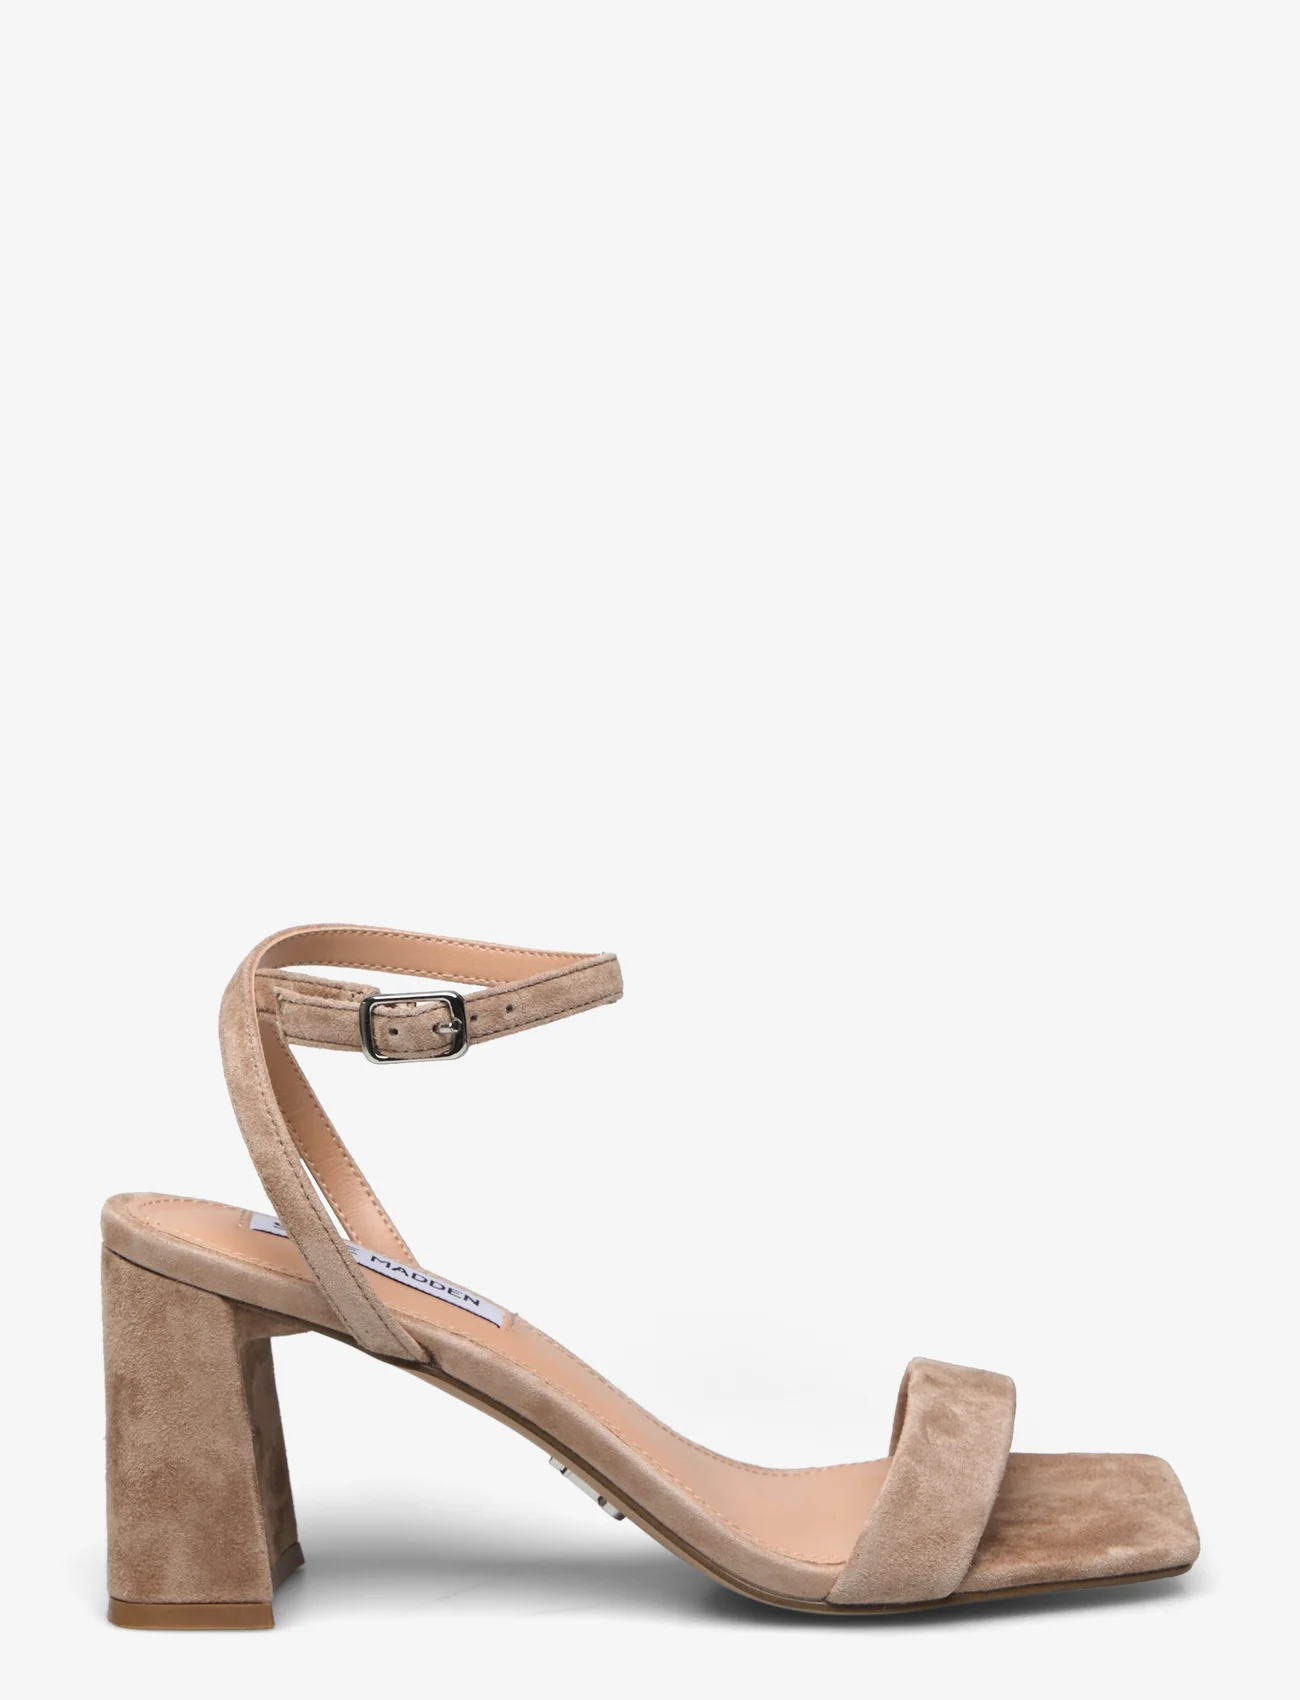 Steve Madden - Luxe Sandal - peoriided outlet-hindadega - tan suede - 1